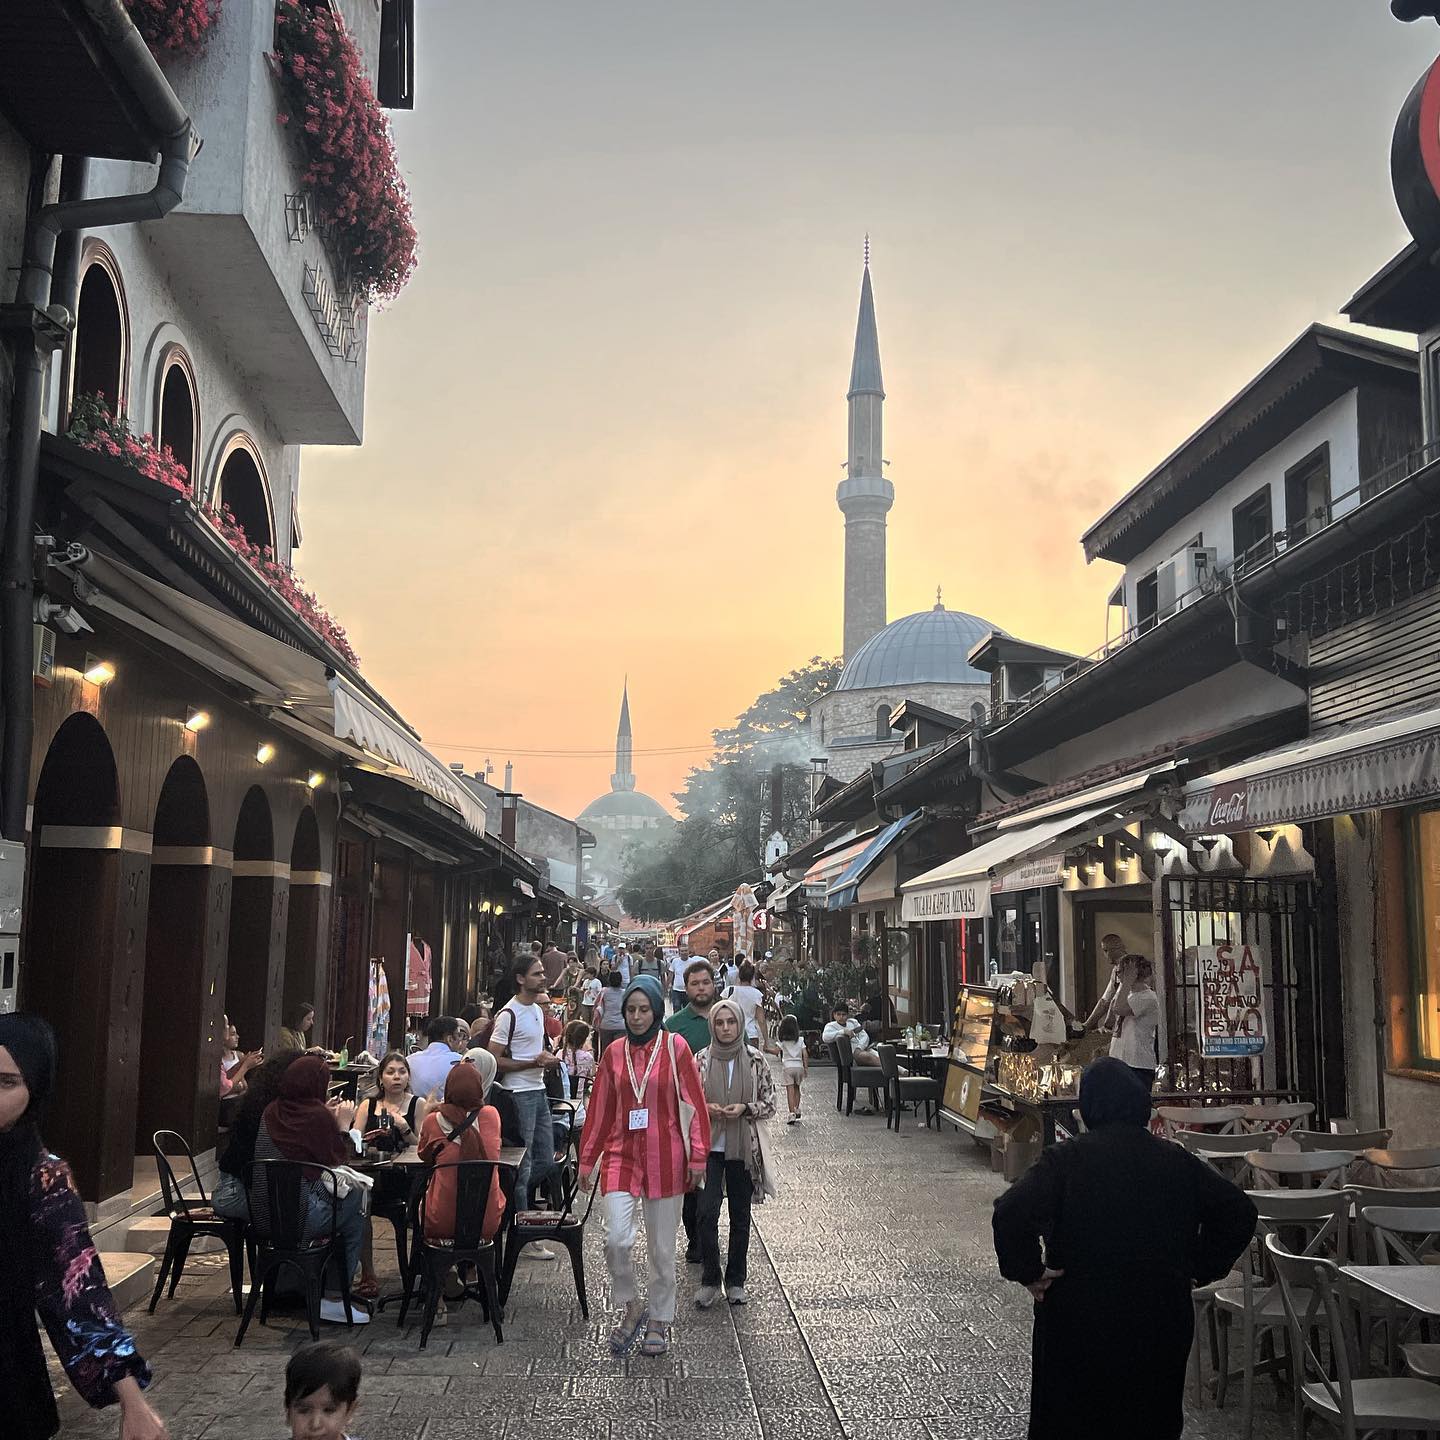 amazing #sarajevo - I returned to the #bosnian capital after 29 years #today… last time I was a young #war correspondent, today I came just as #tourist … what a change! #Bosnia #mosque #iphone #iphone13pro #travel #tourism